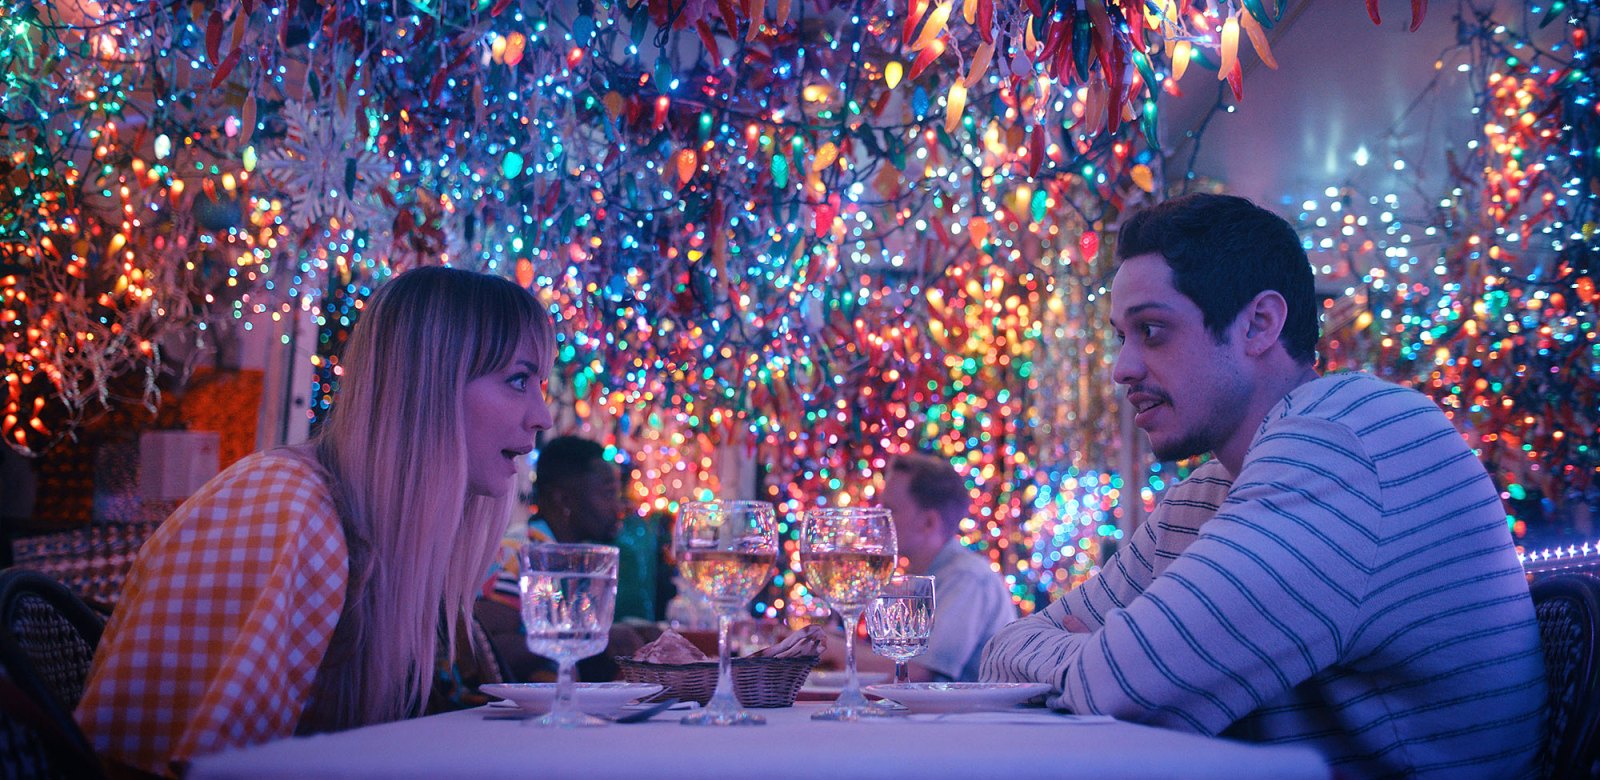 Meet Cute Is There a Trailer Pete Davidson and Kaley Cuoco